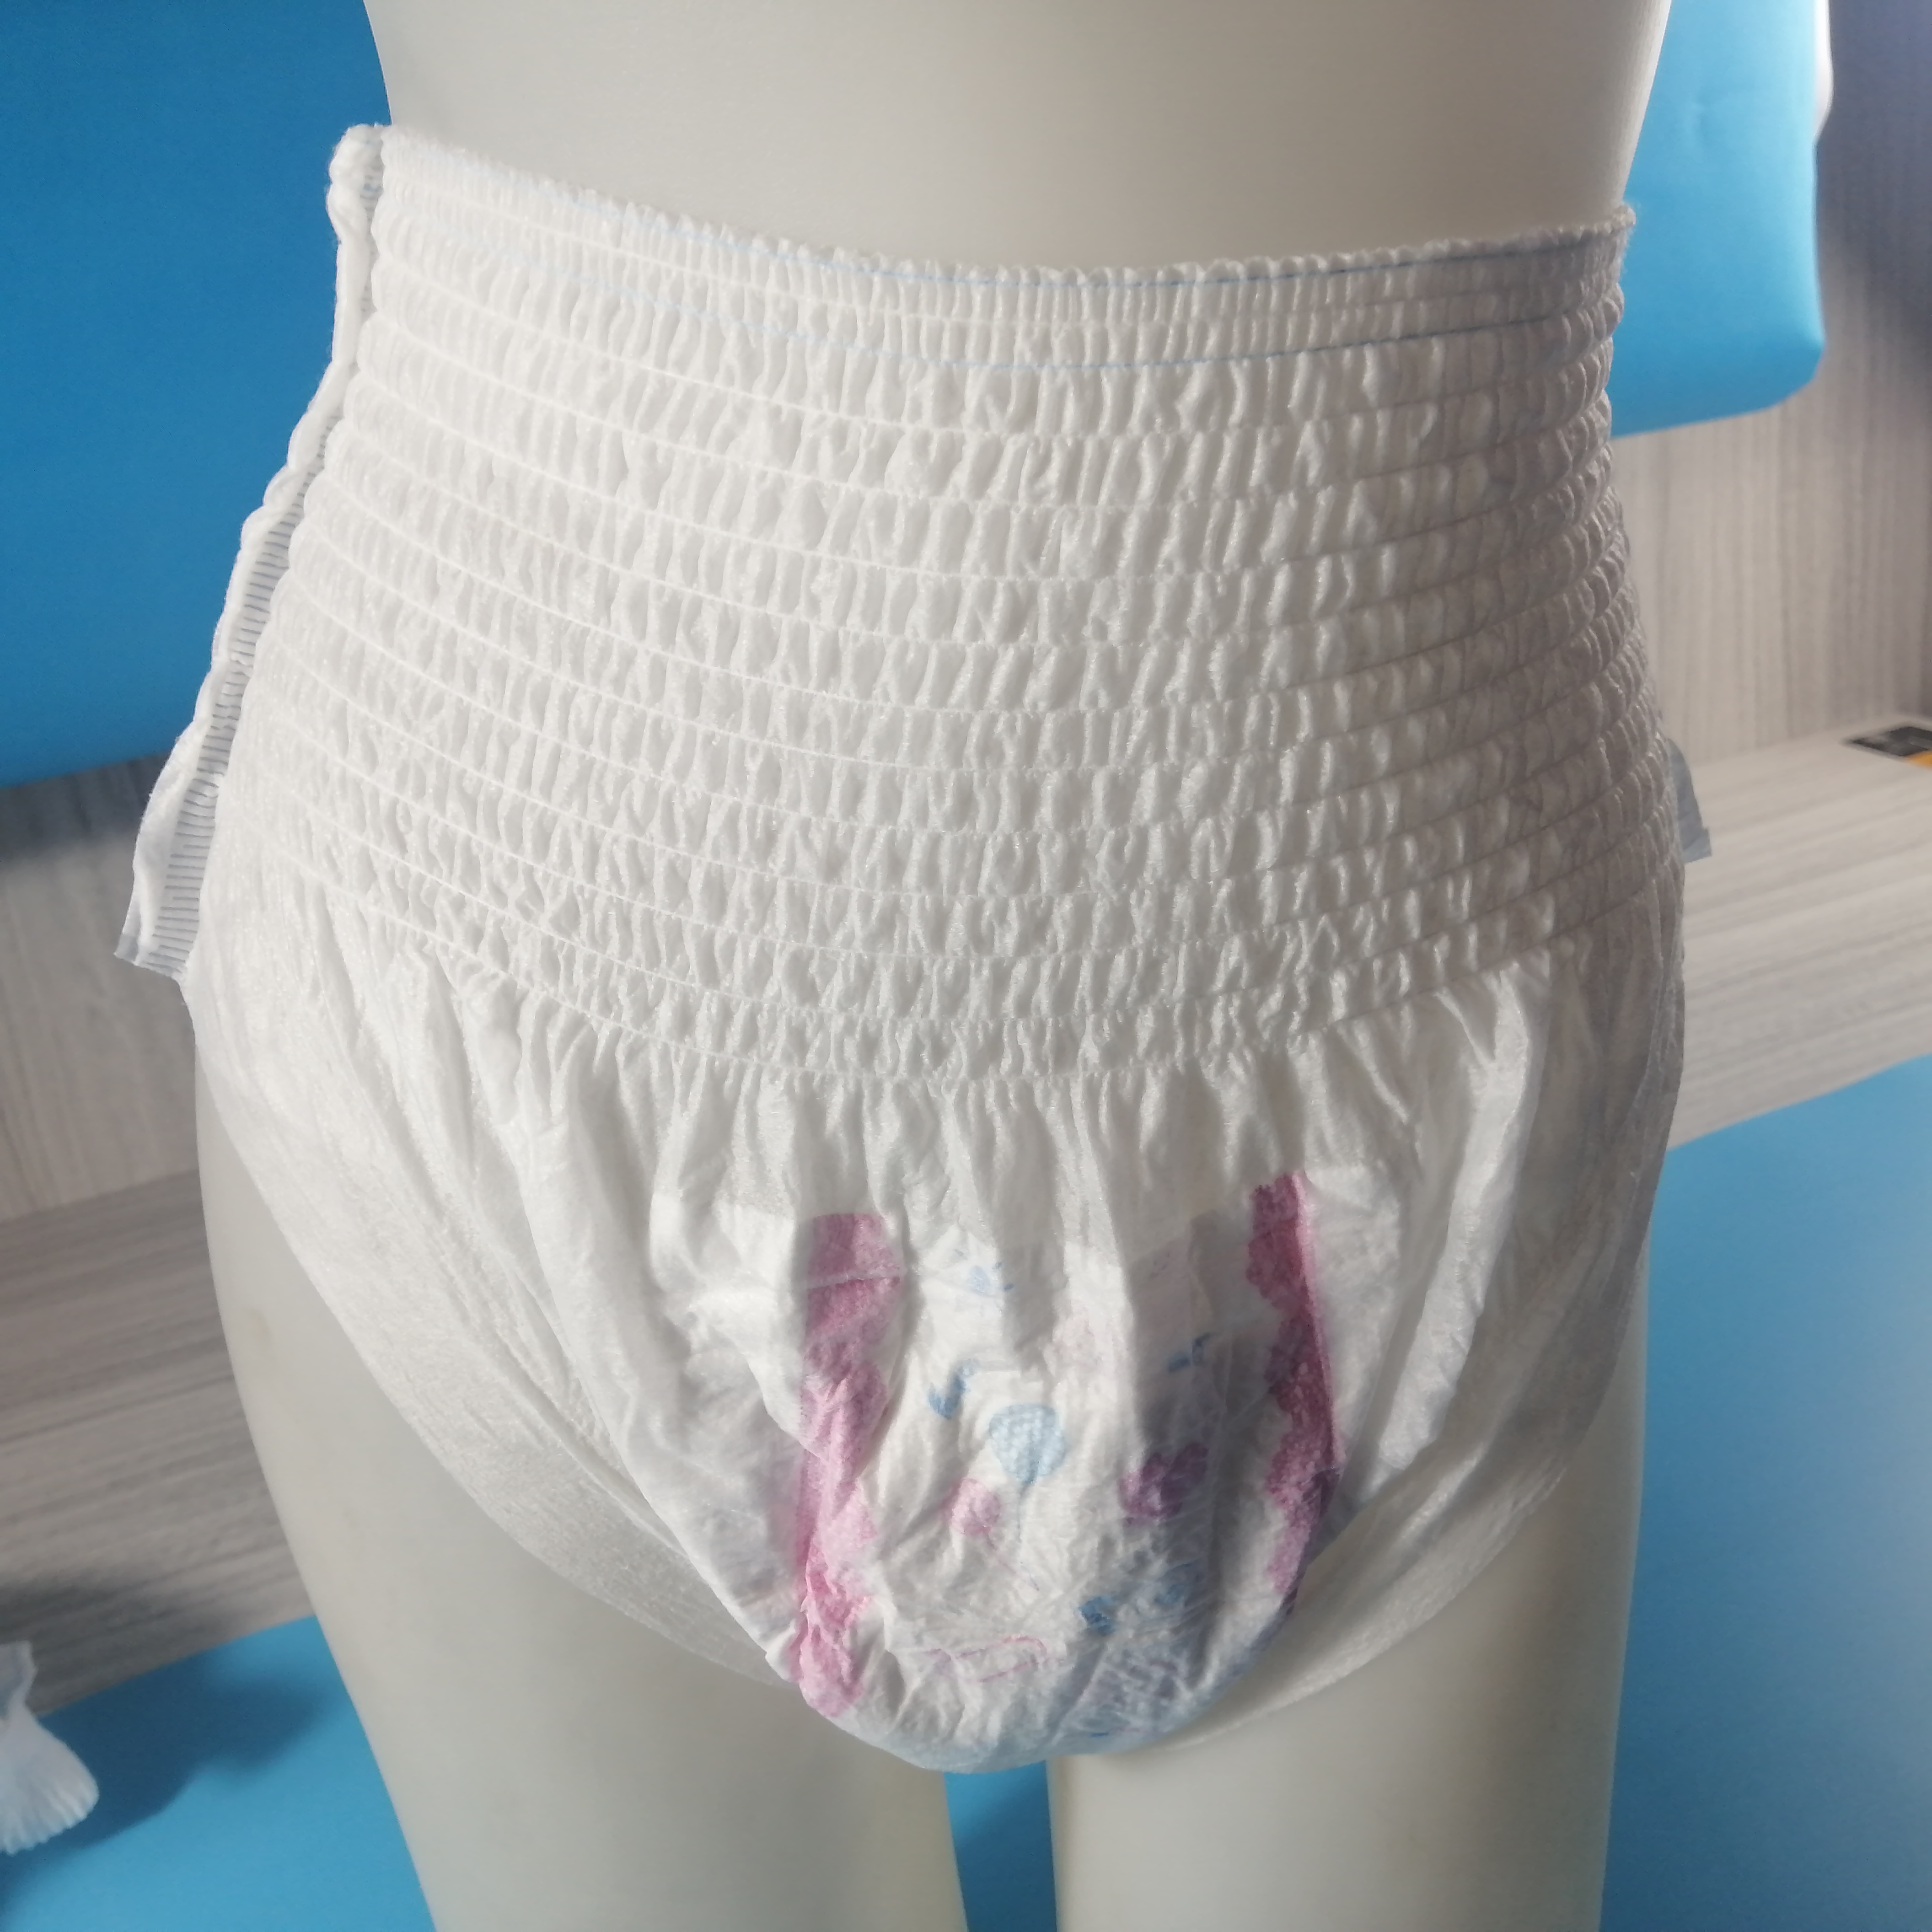 China Low price Best Quality Disposable Menstrual Pants Sanitary Napkin  panty type with soft and healthy surface Manufacture and Factory